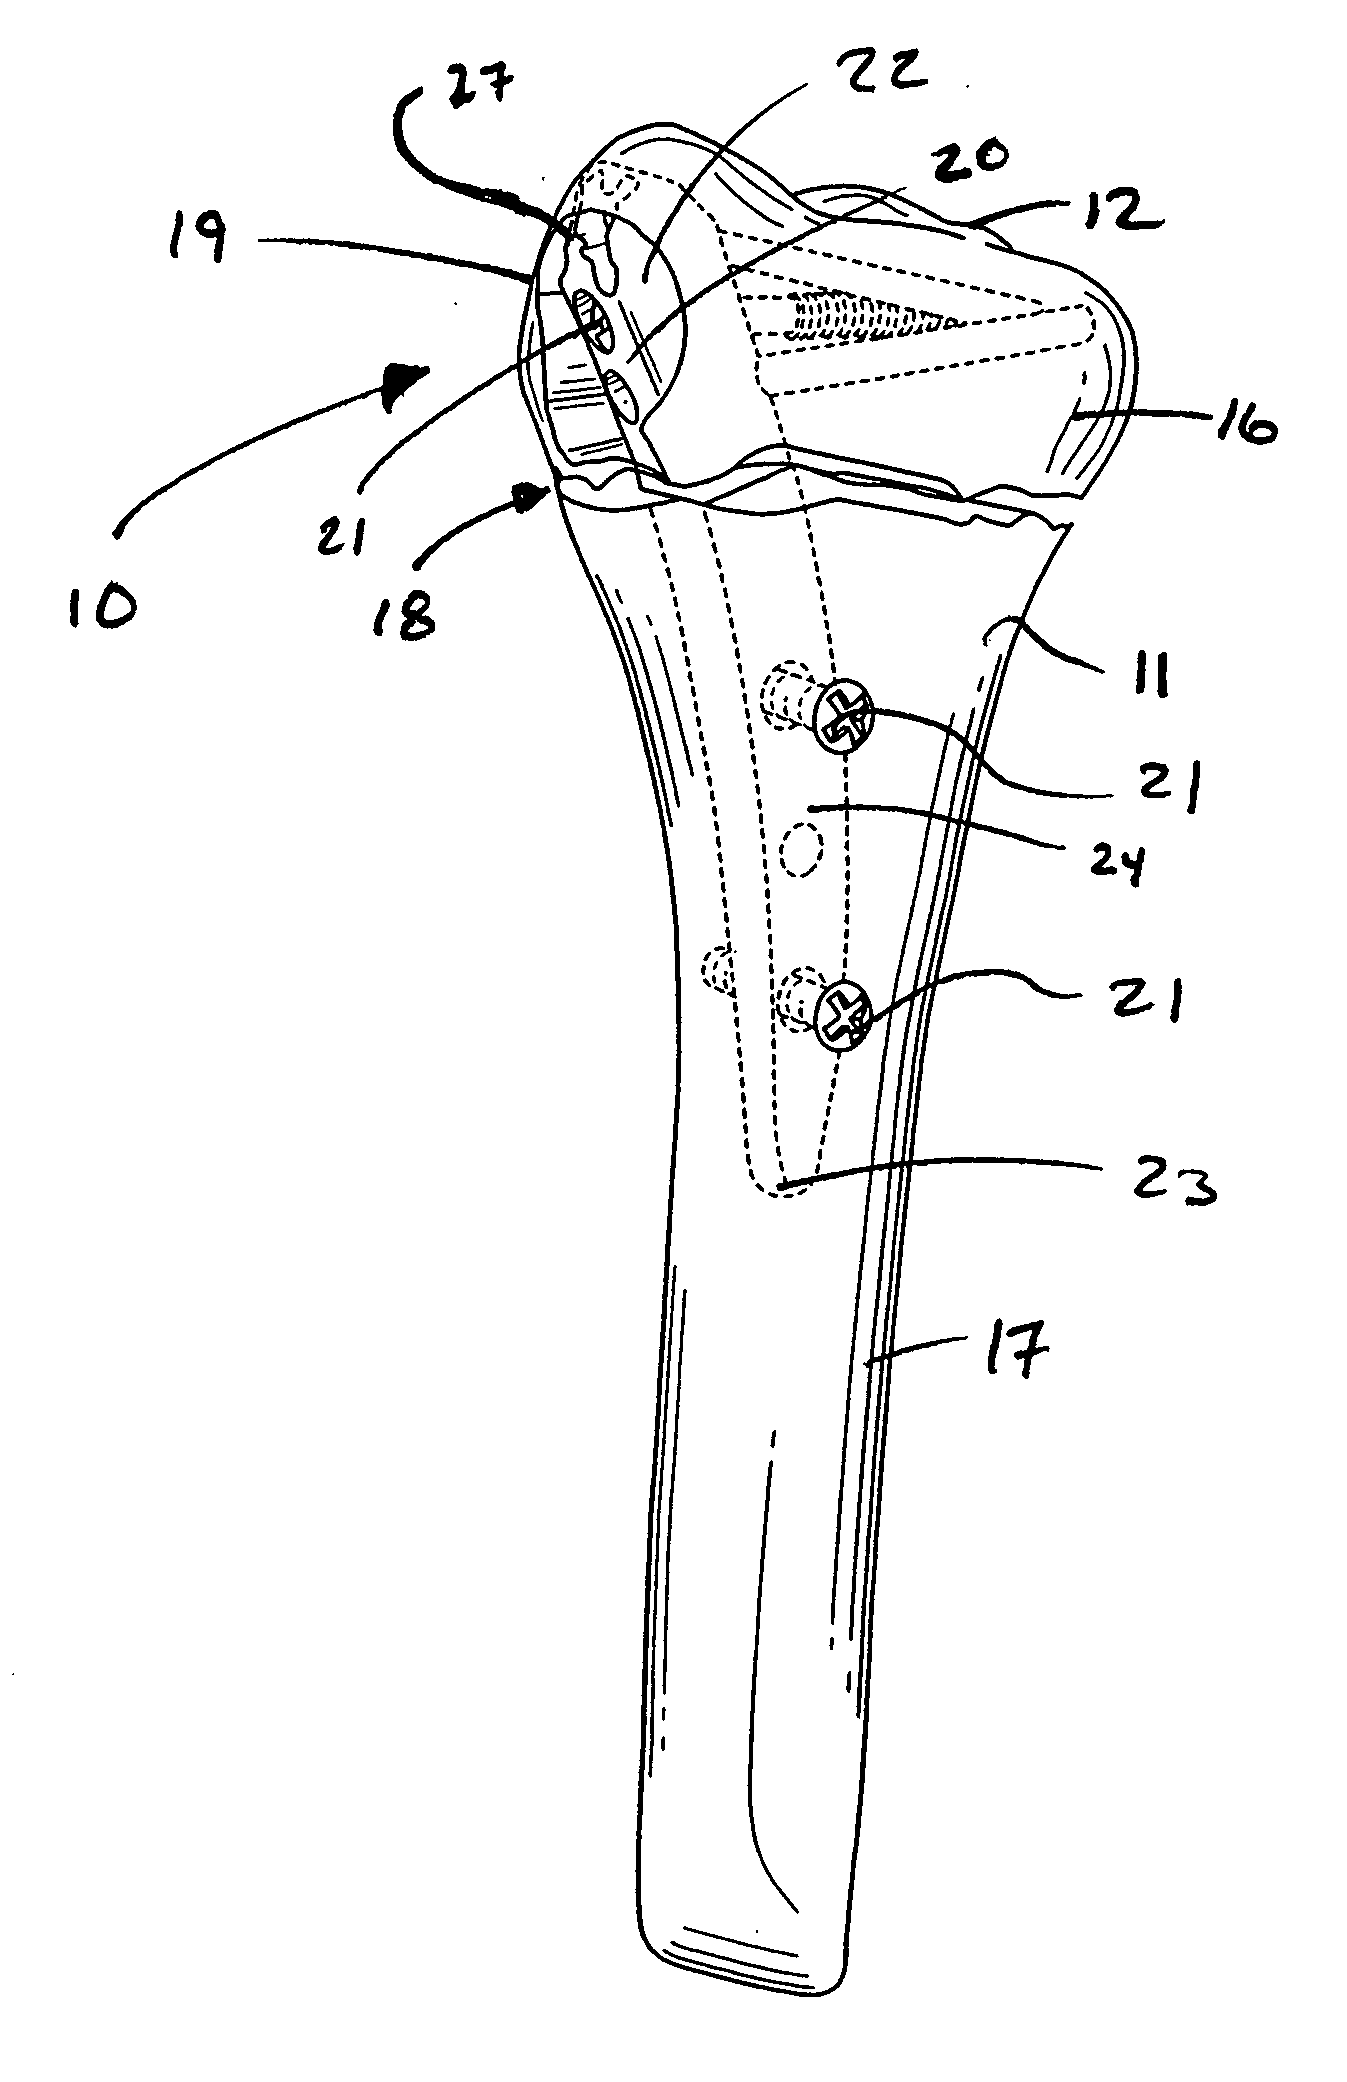 Intramedullary fixation assembly and devices and methods for installing the same